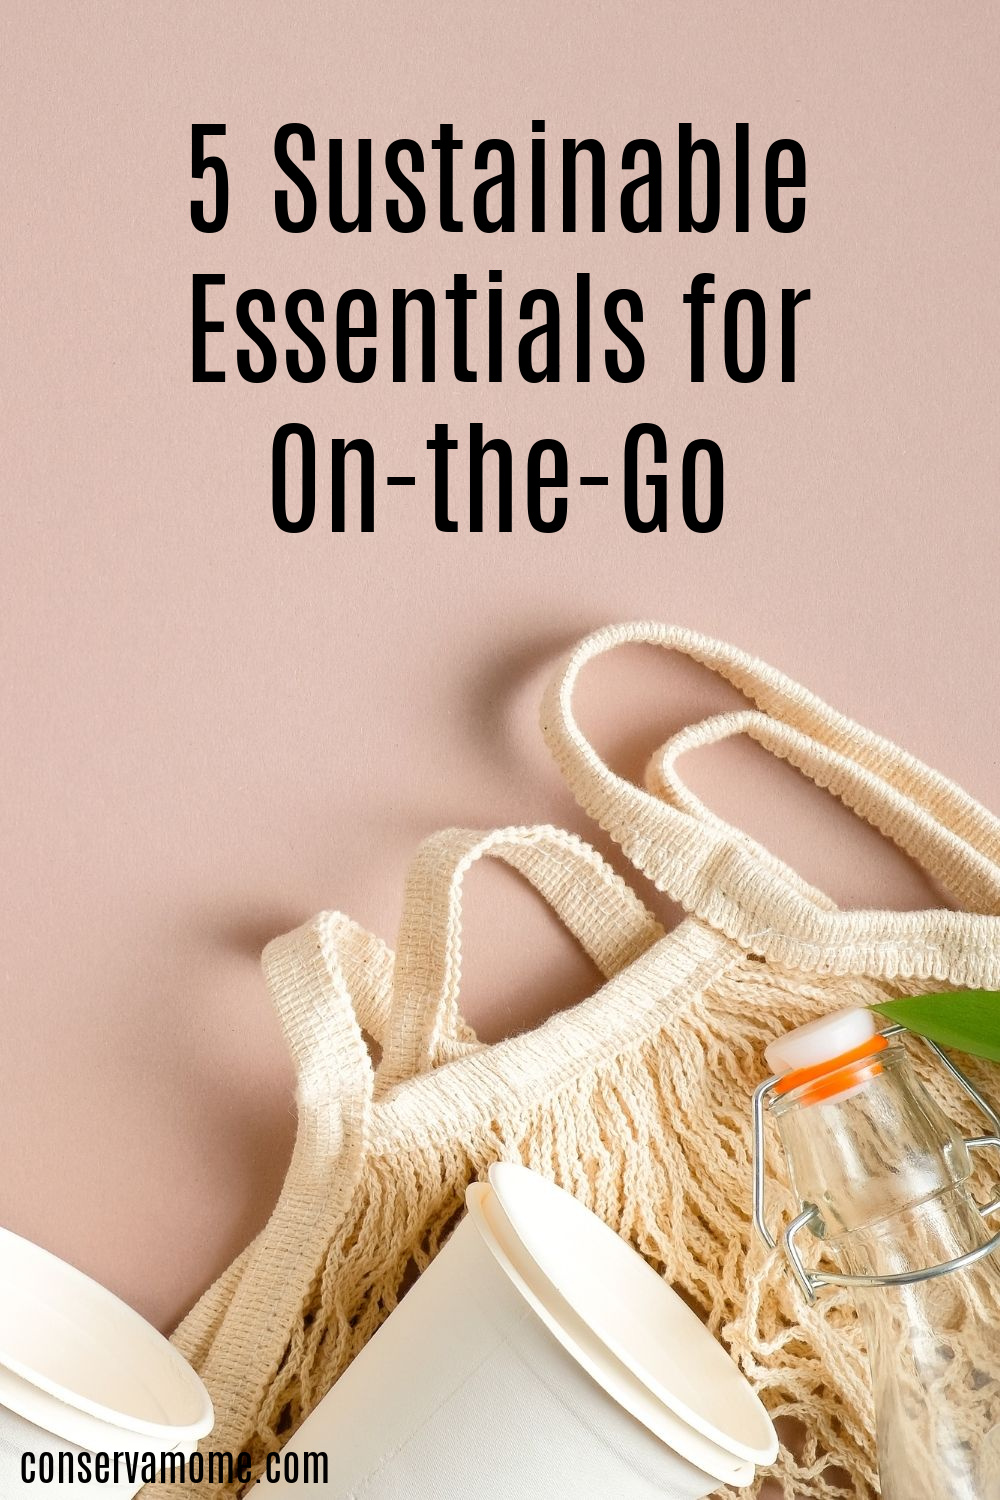 5 Sustainable Essentials for On-the-Go